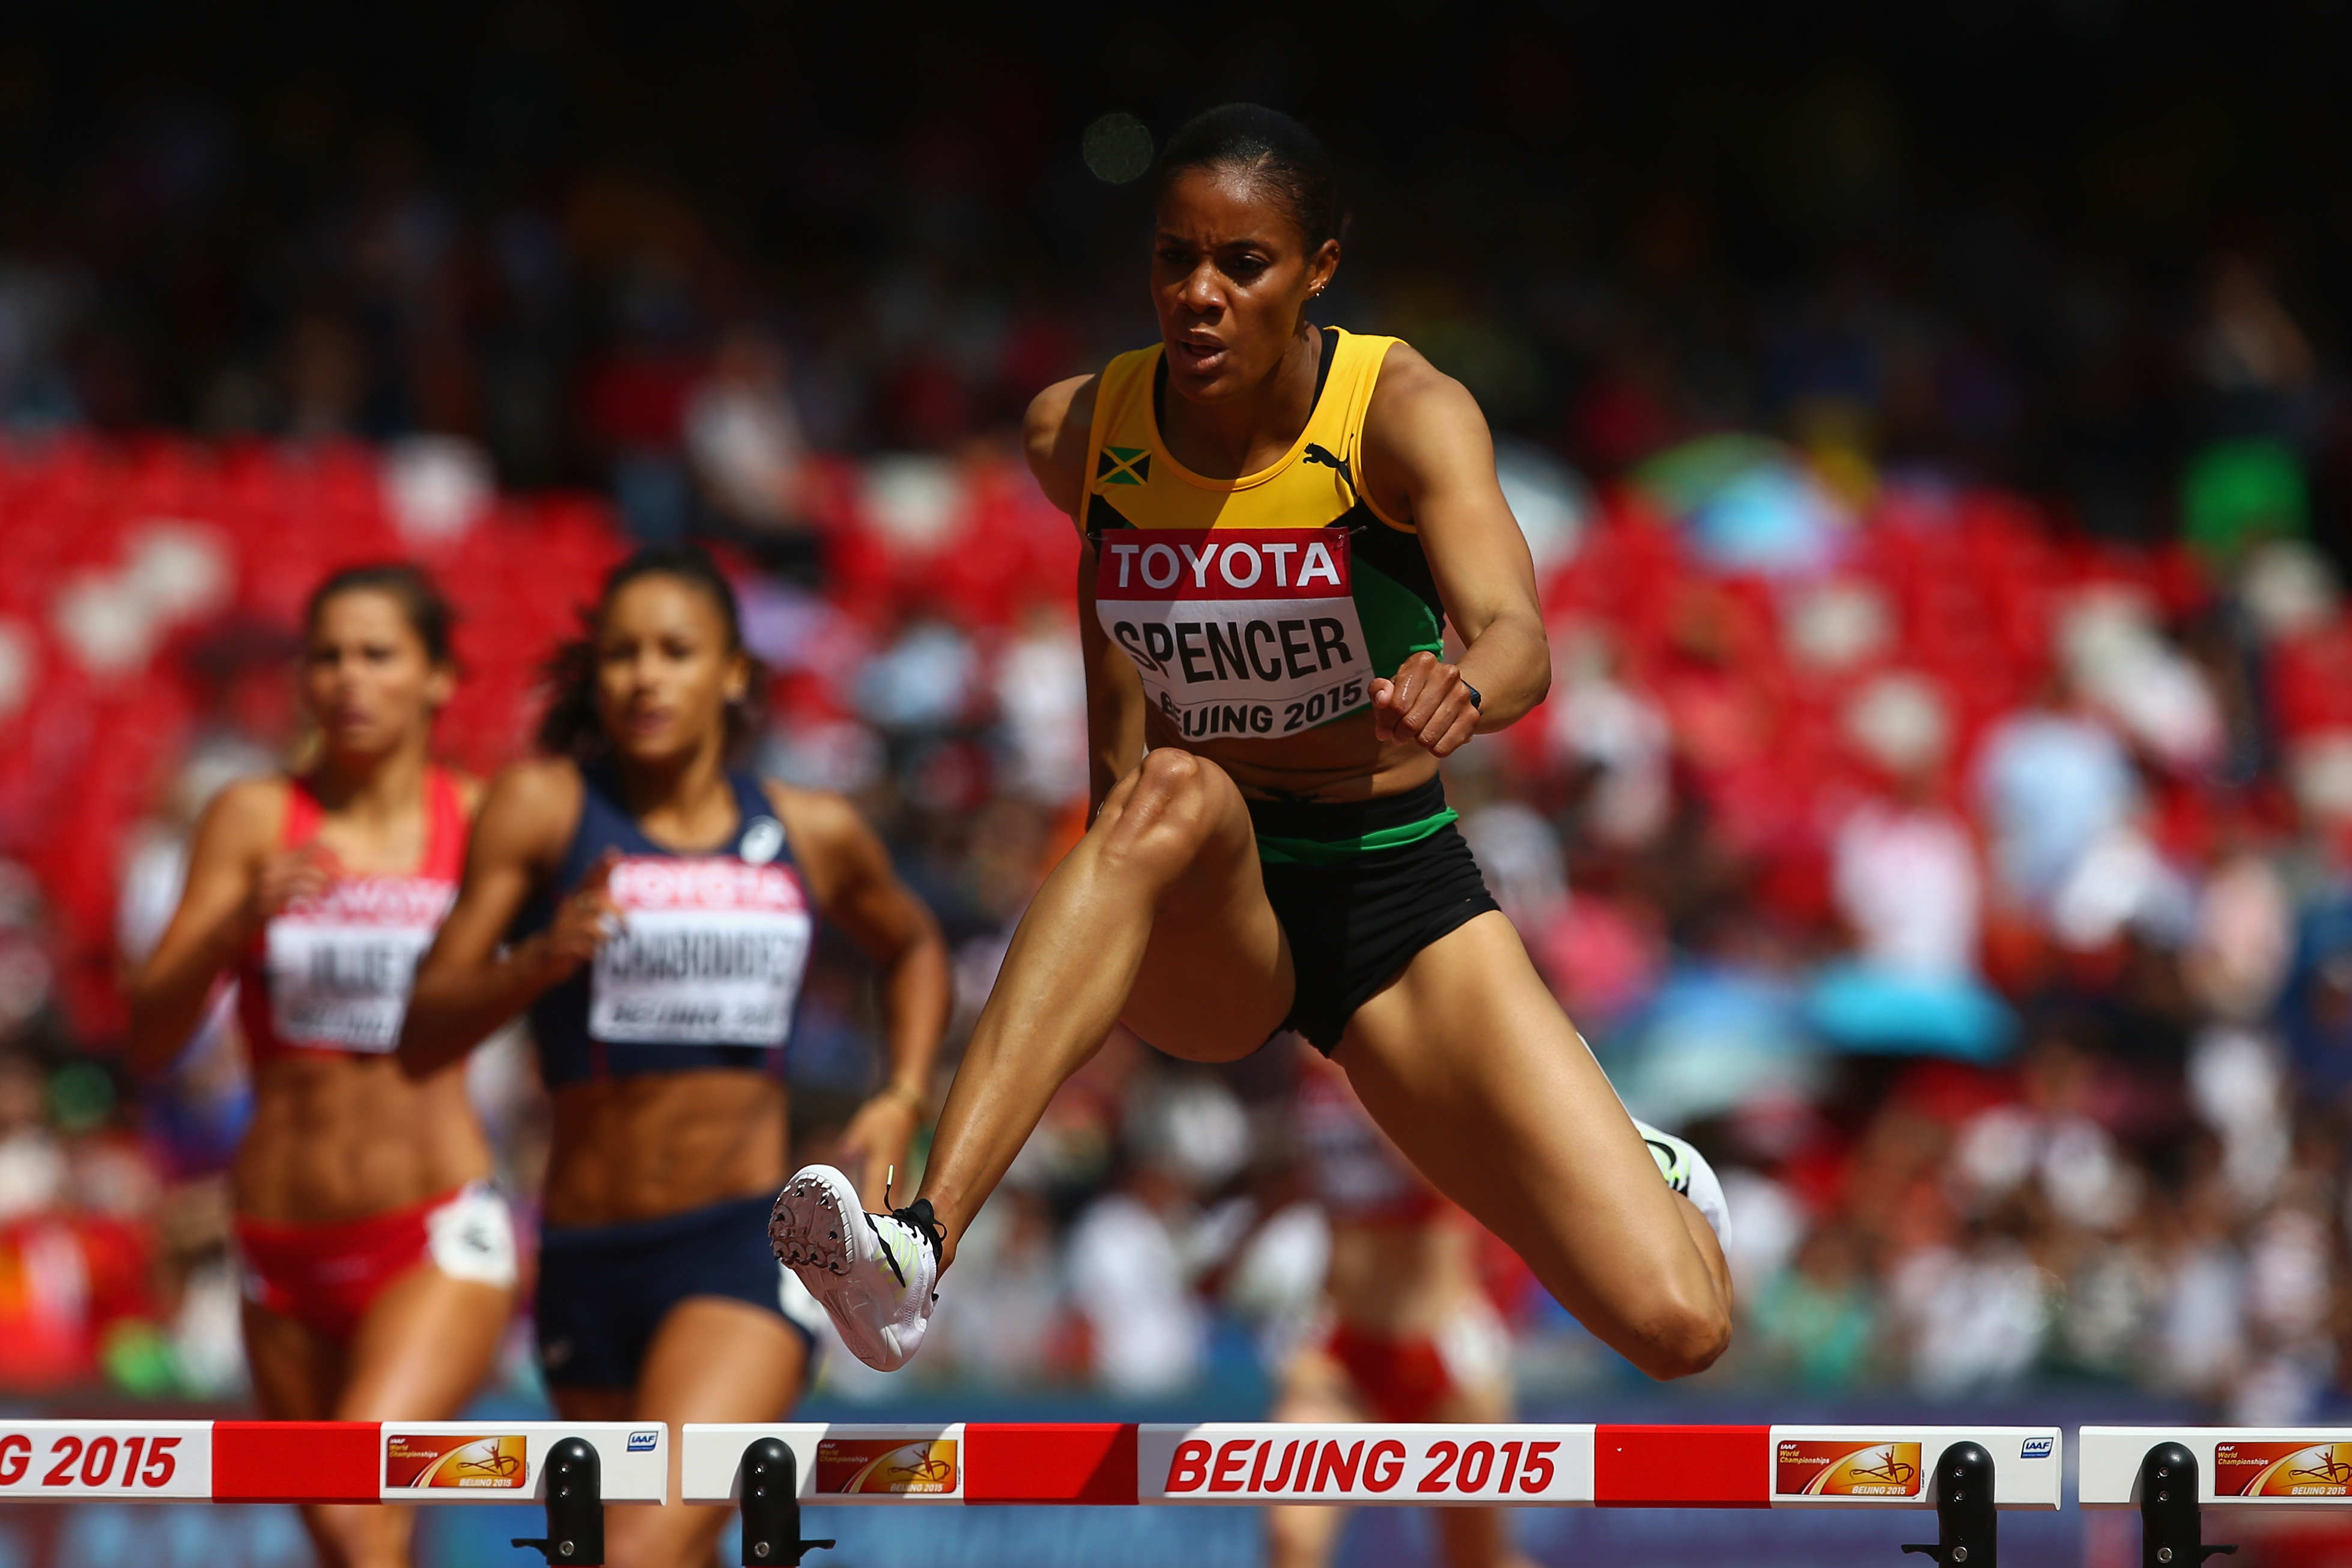 Kaliese Spencer wins doping rules violation case